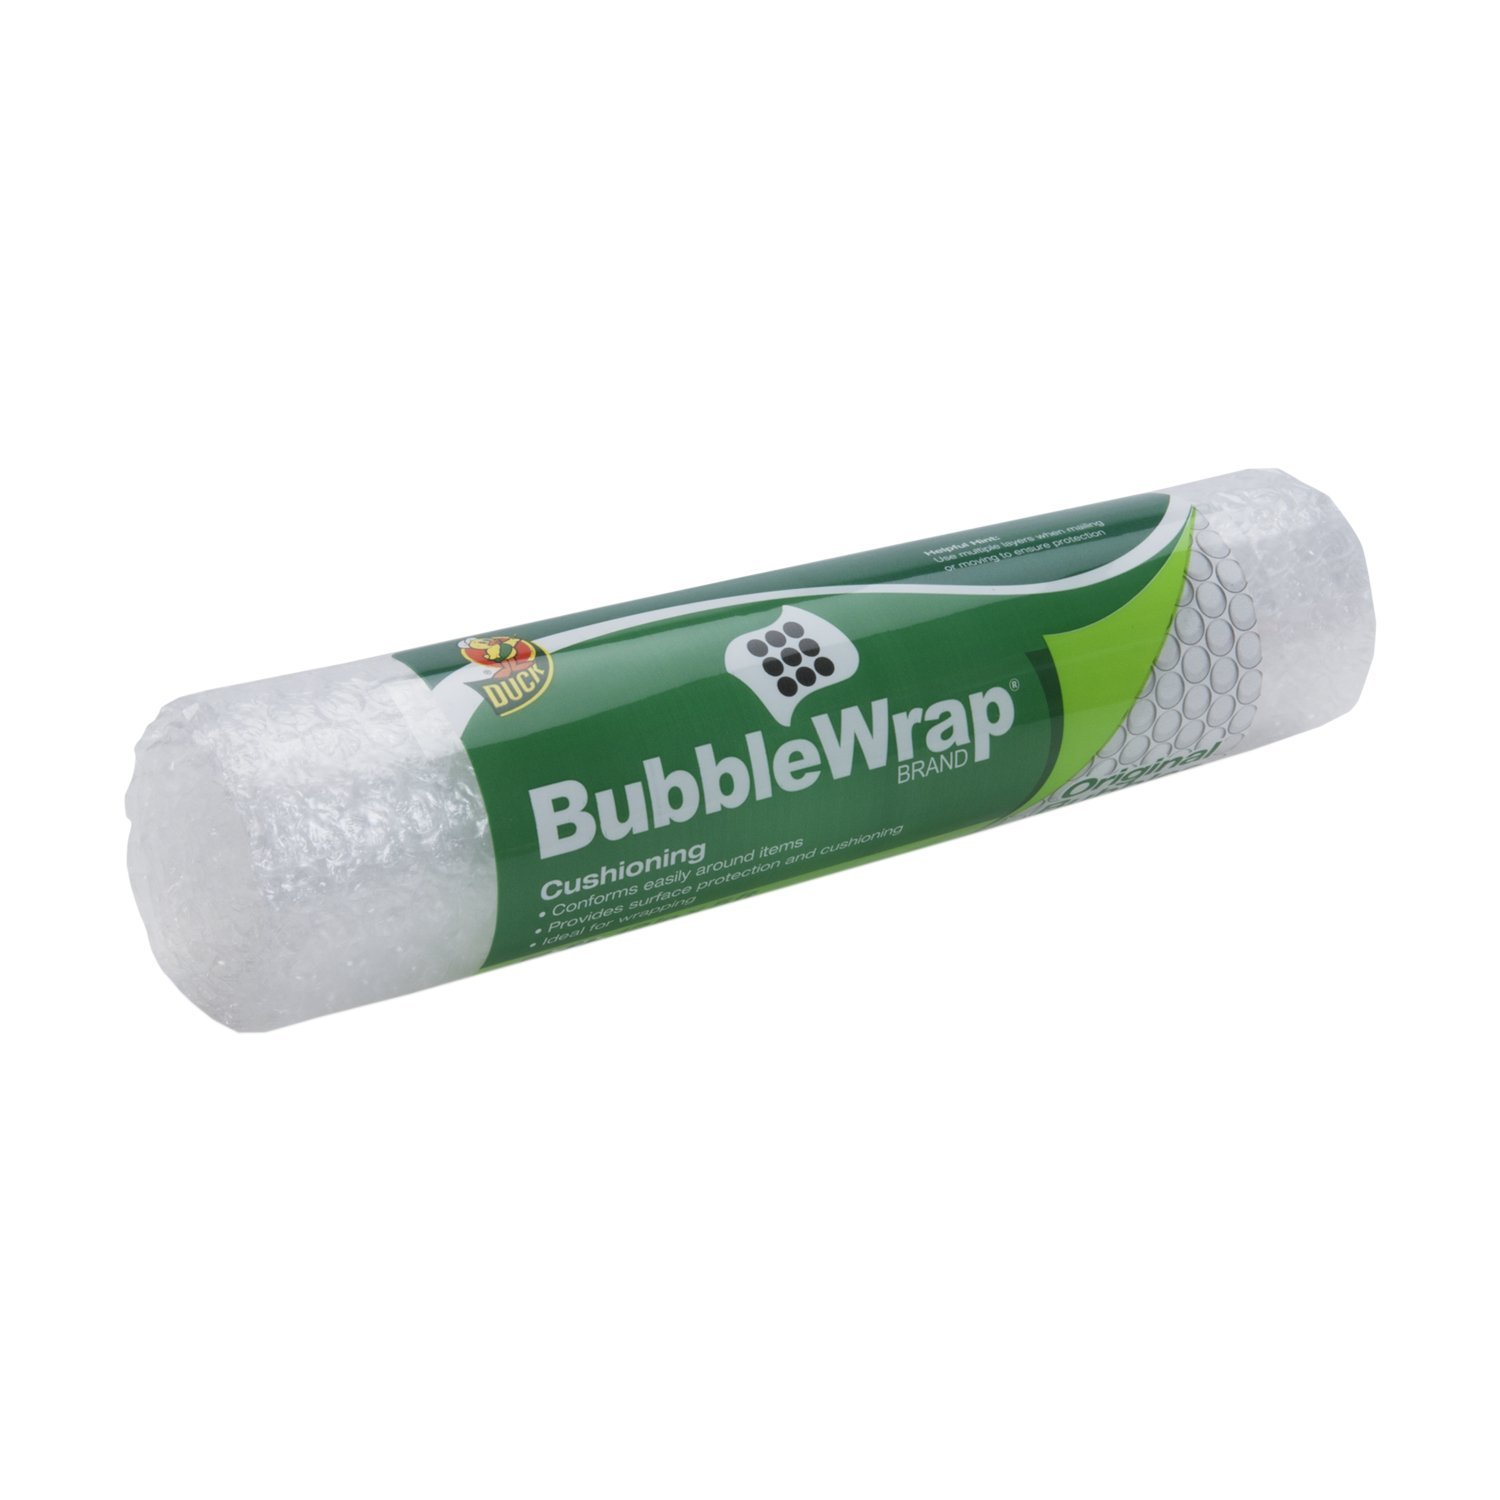 Duck Brand Bubble Wrap Original Protective Packaging Single Roll ...